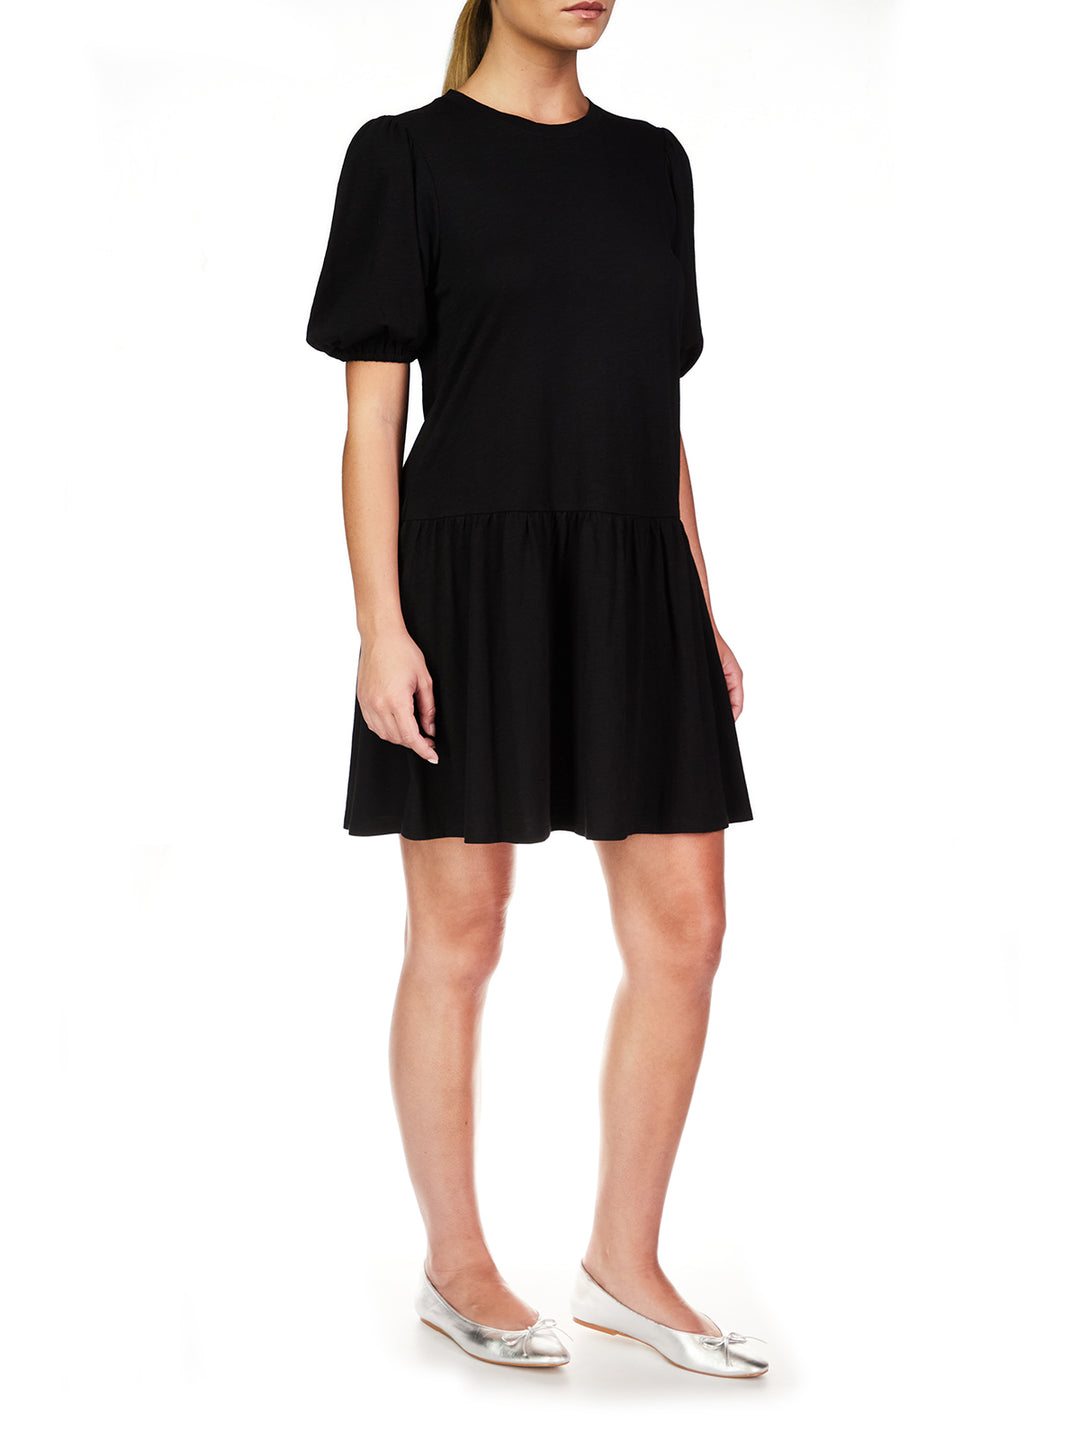 ONLY WAY KNIT DRESS-BLACK - Kingfisher Road - Online Boutique